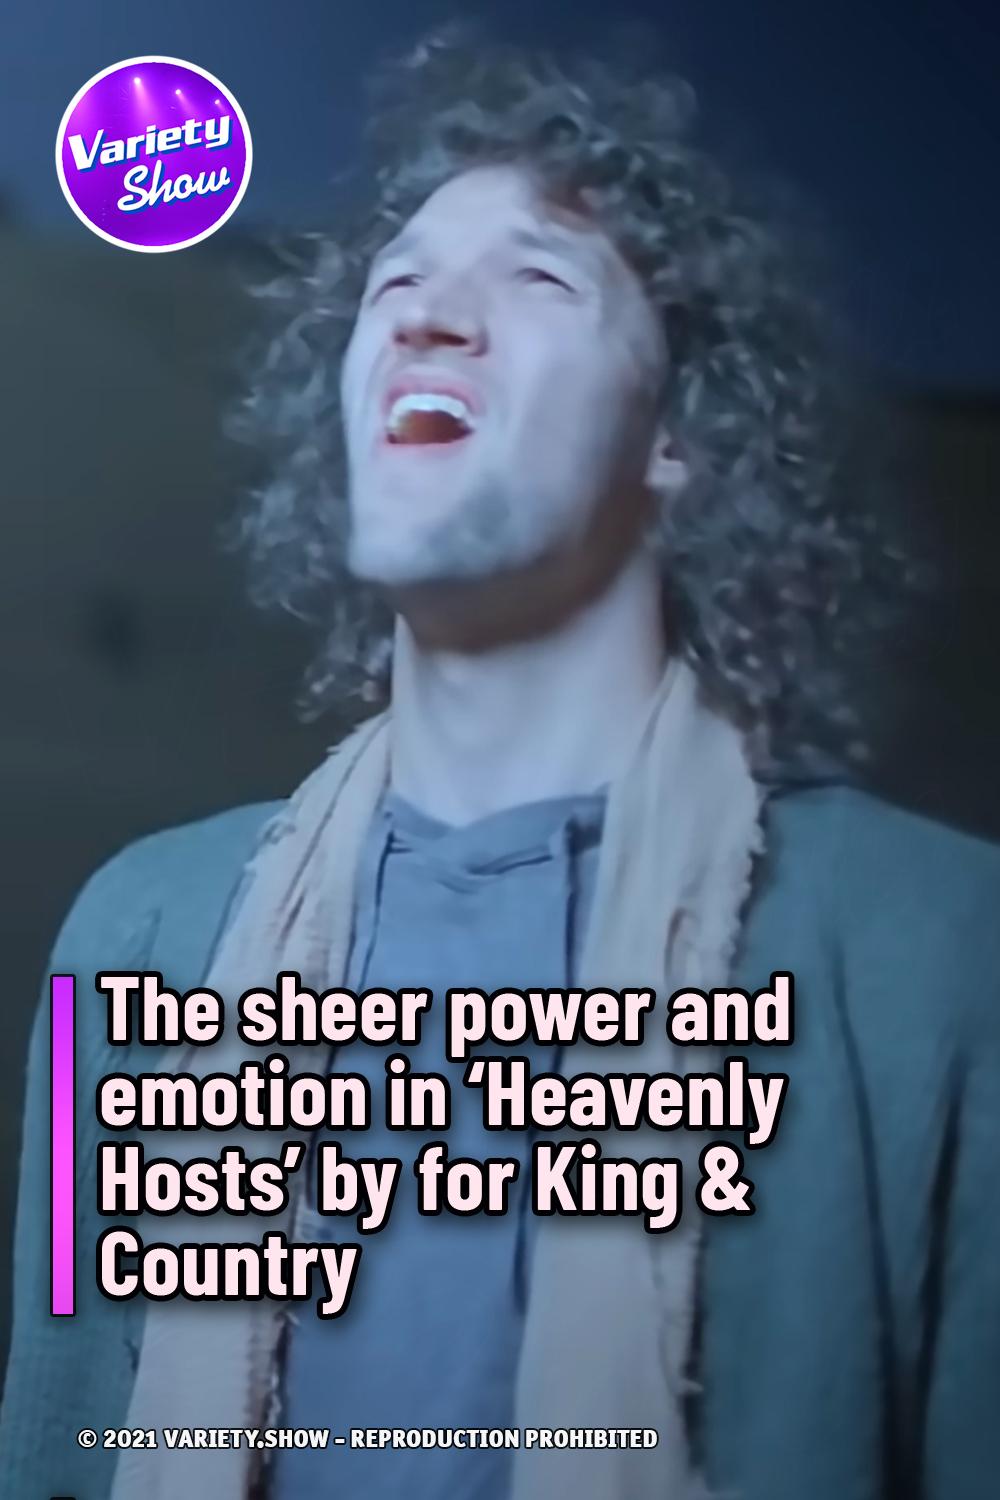 The sheer power and emotion in ‘Heavenly Hosts’ by for King & Country